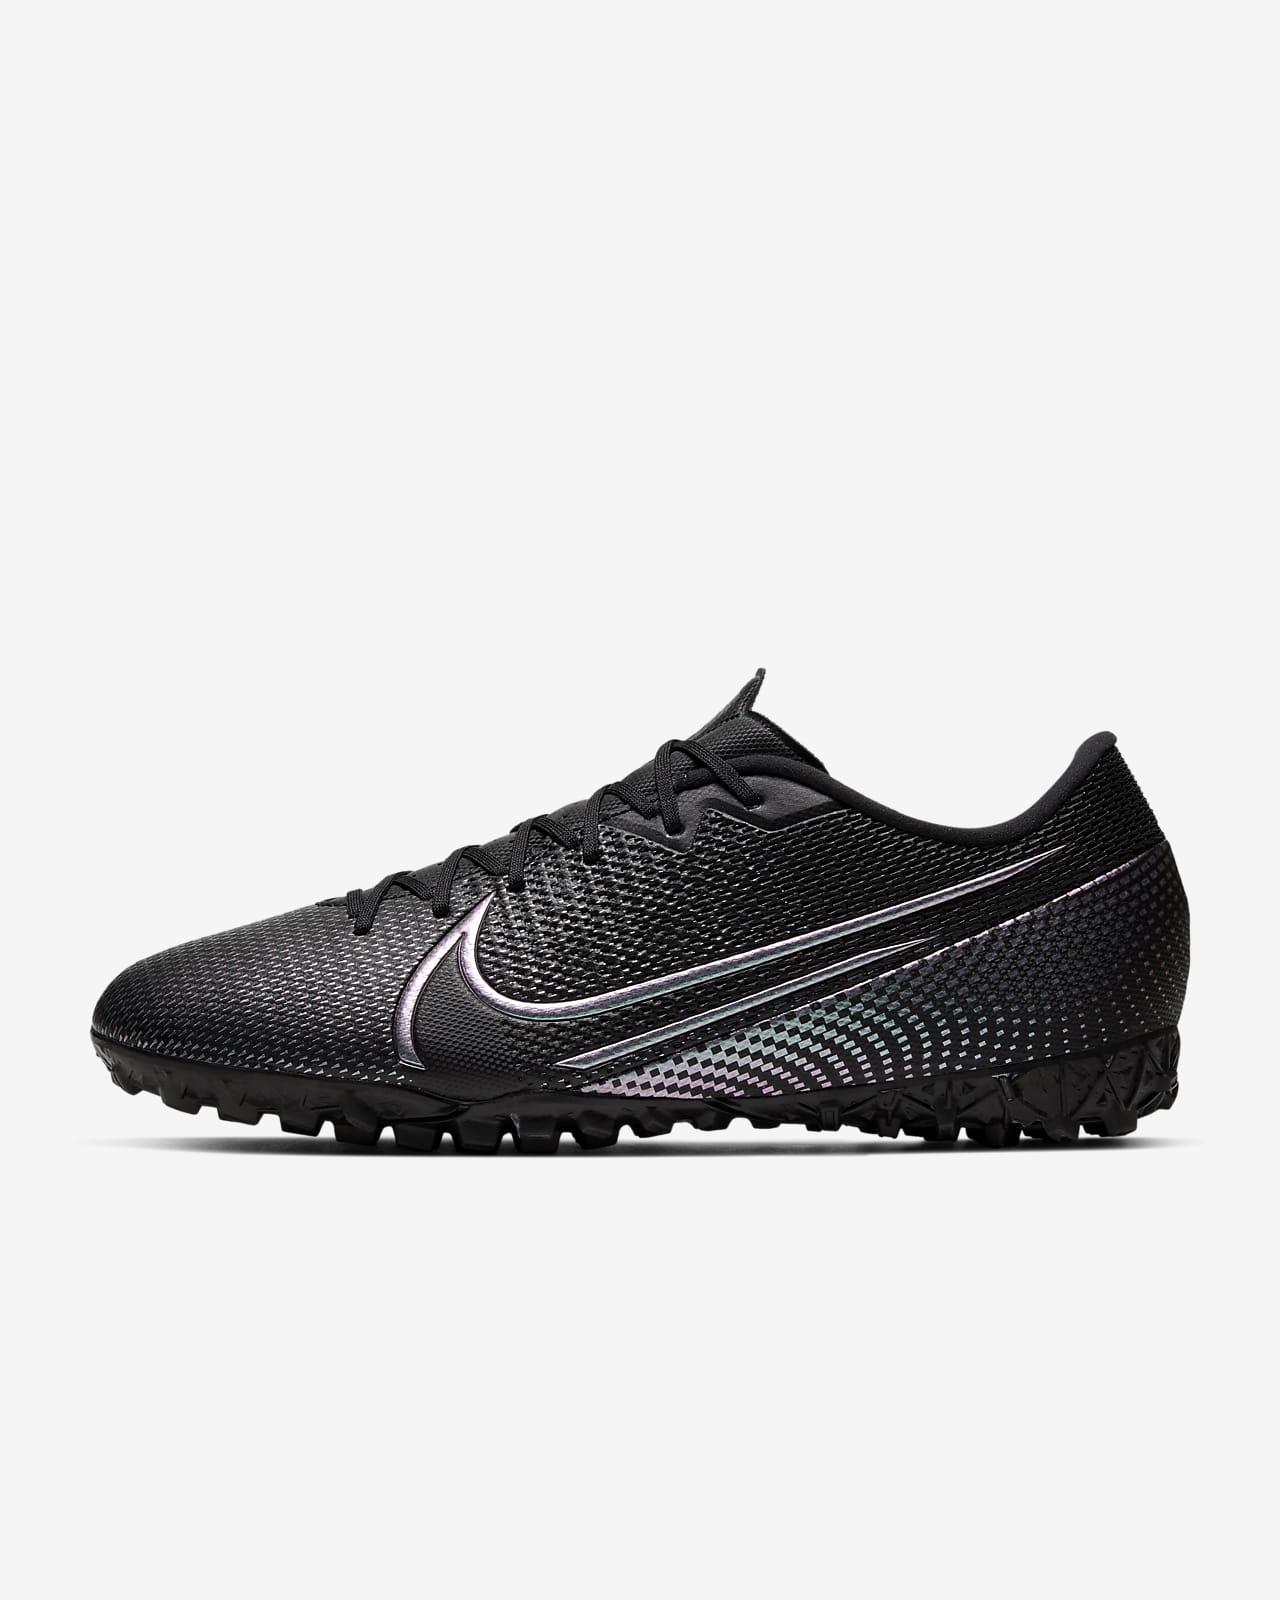 all black turf soccer shoes